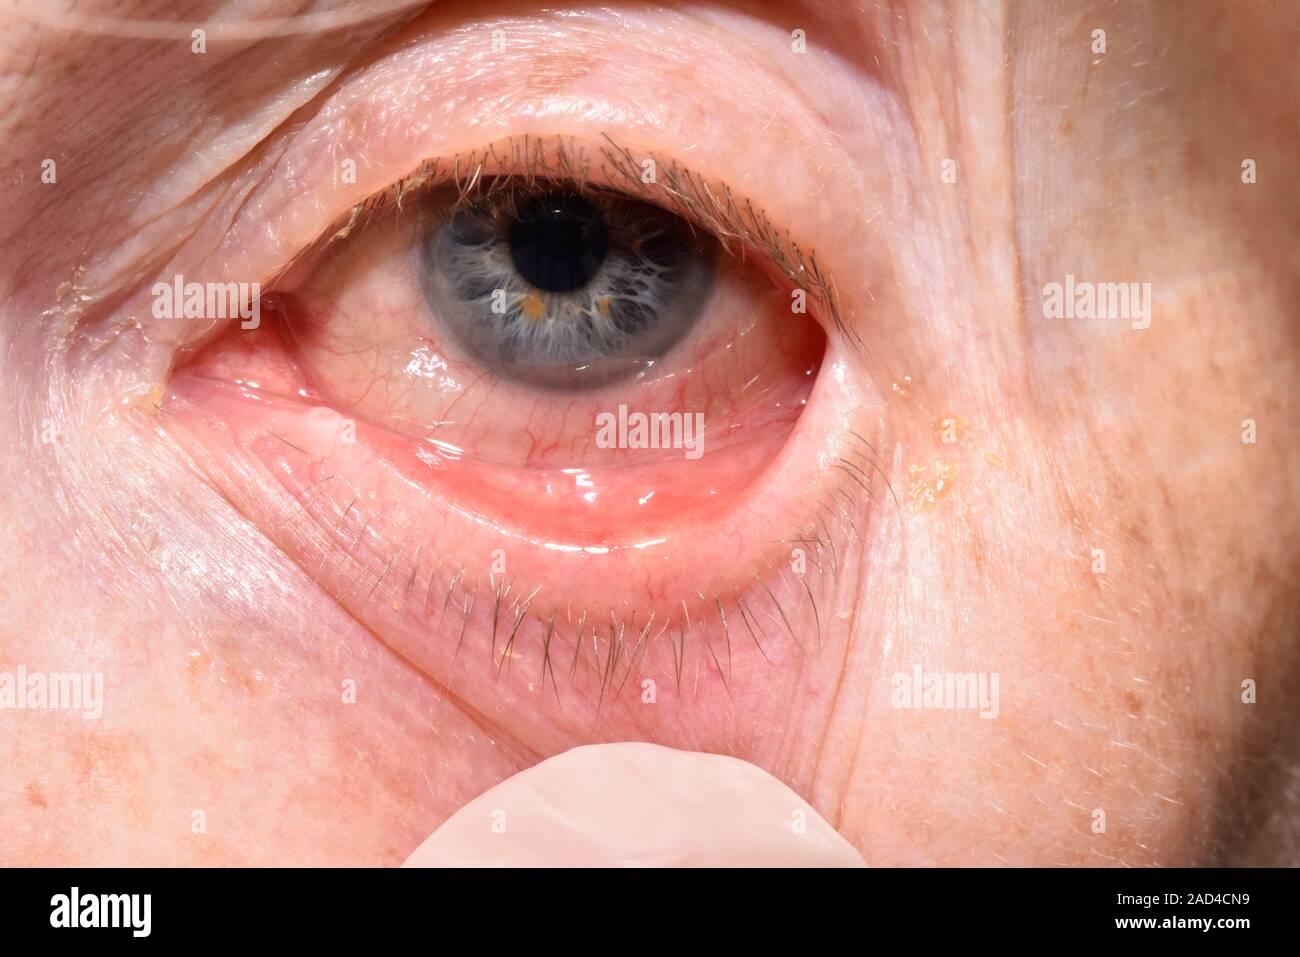 Meibomian cyst. Close-up of a meibomian abscess on the lower eyelid of a 72-year-old female patient. A meibomian cyst (chalazion) is caused when the s Stock Photo